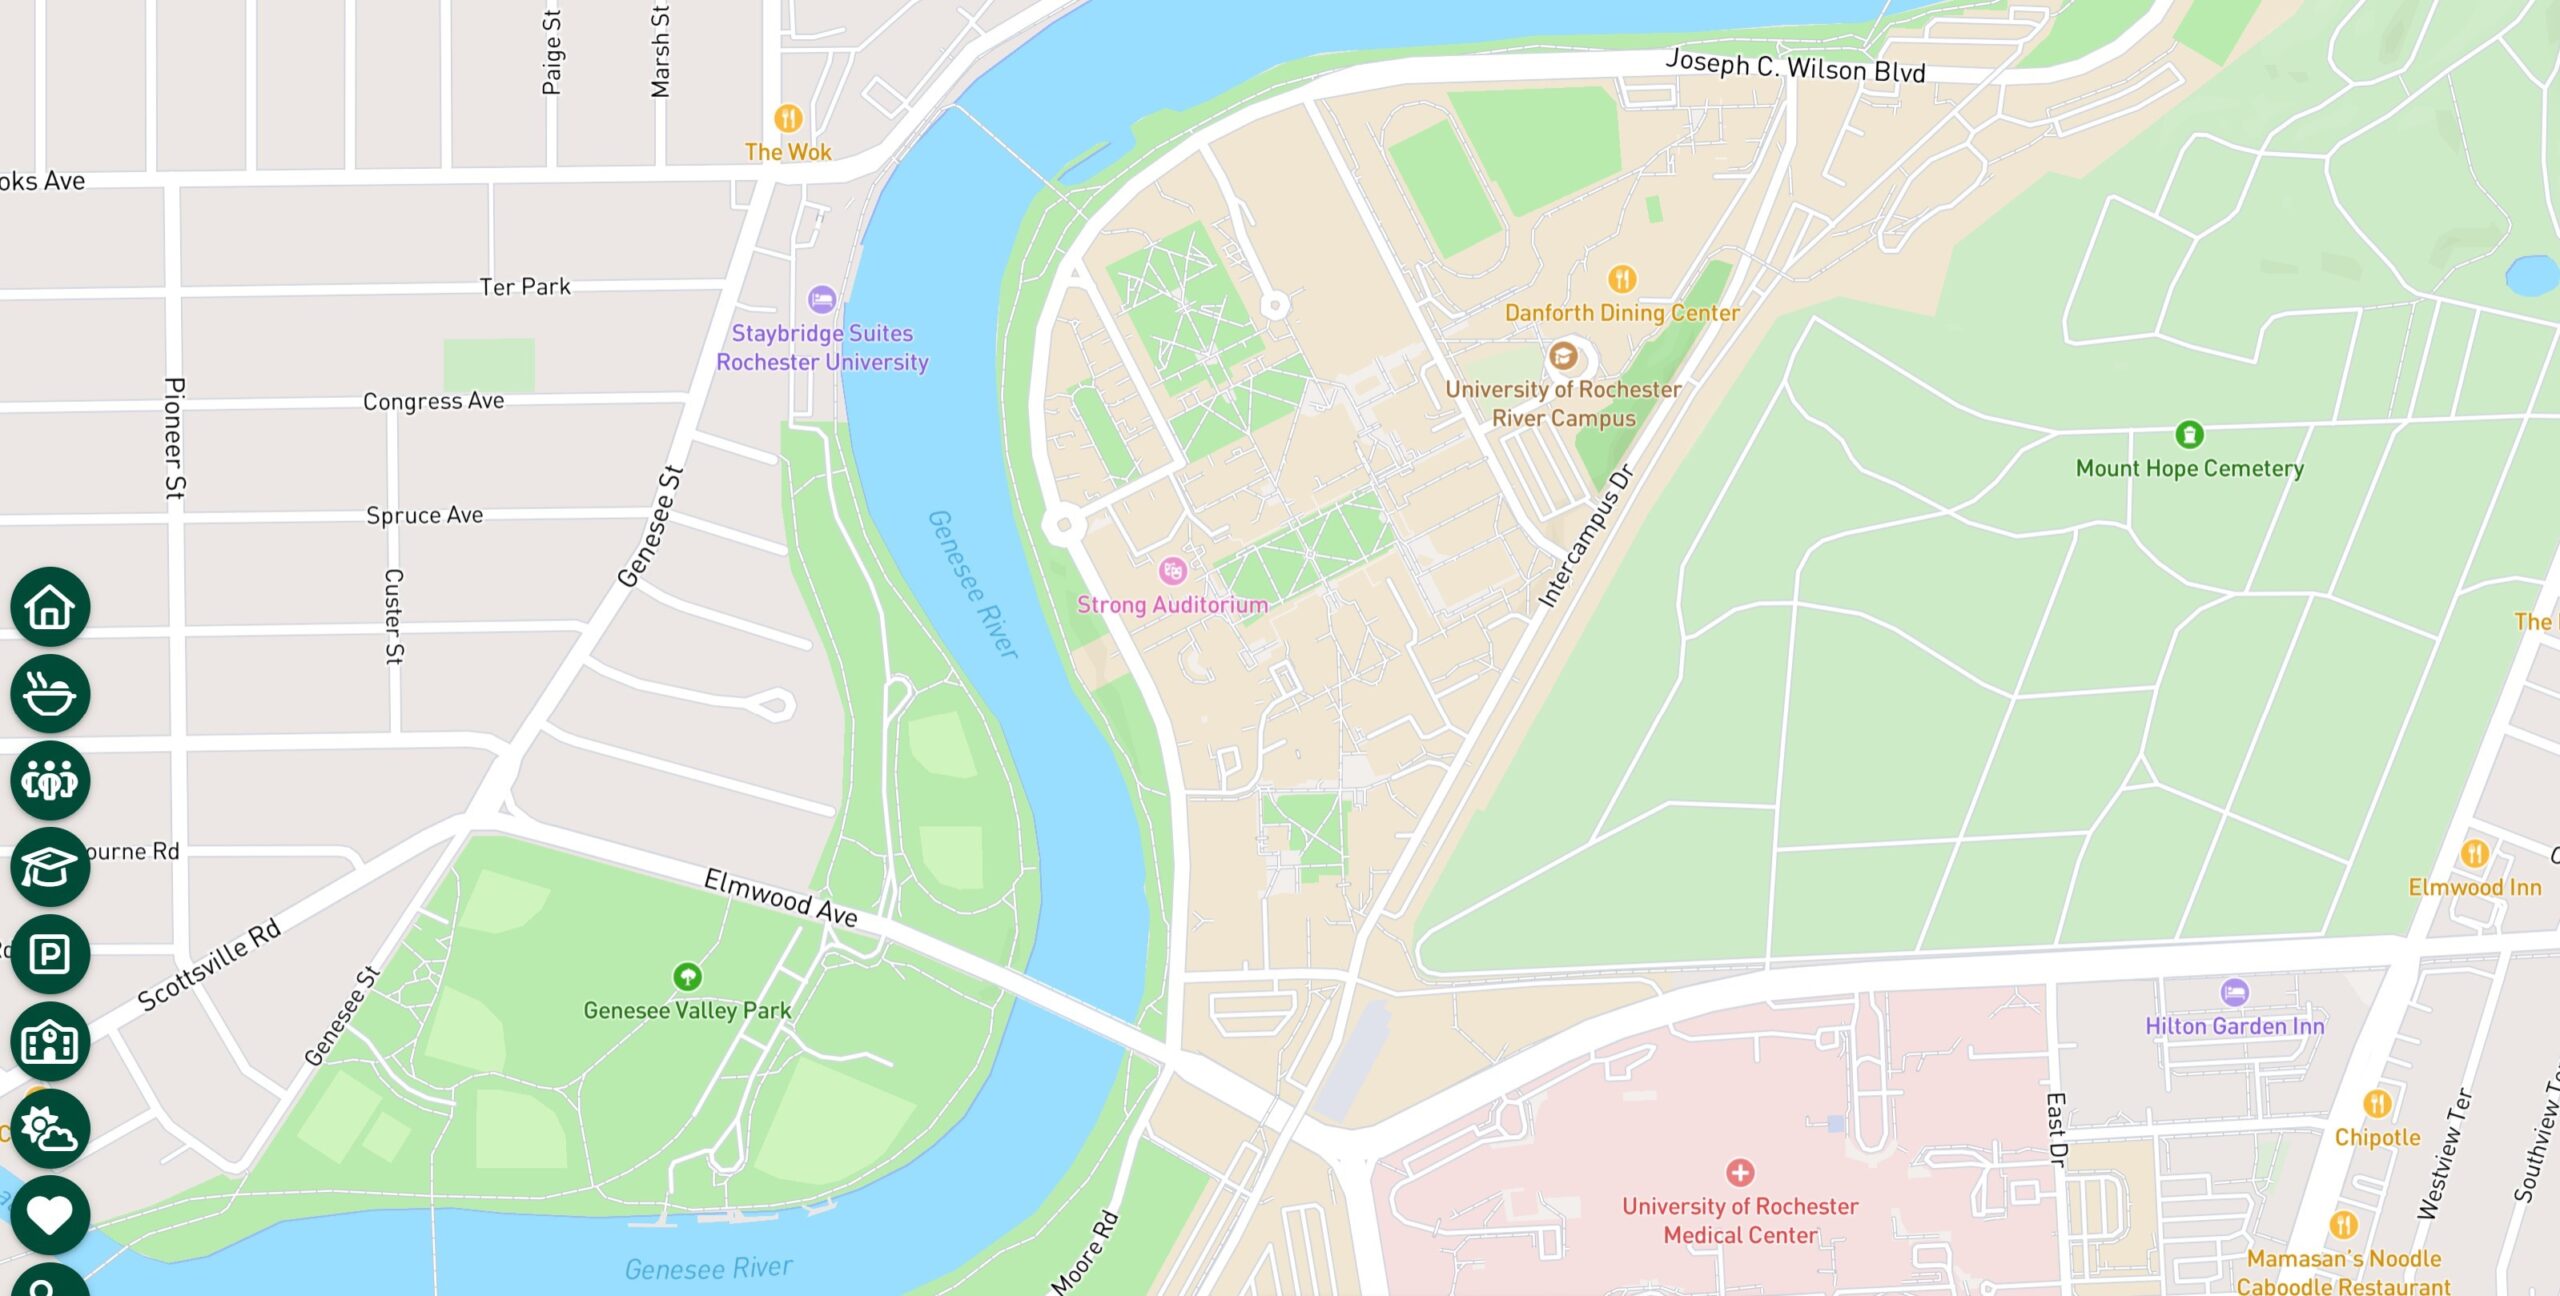 Map of University of Rochester's River Campus and Medical Center.